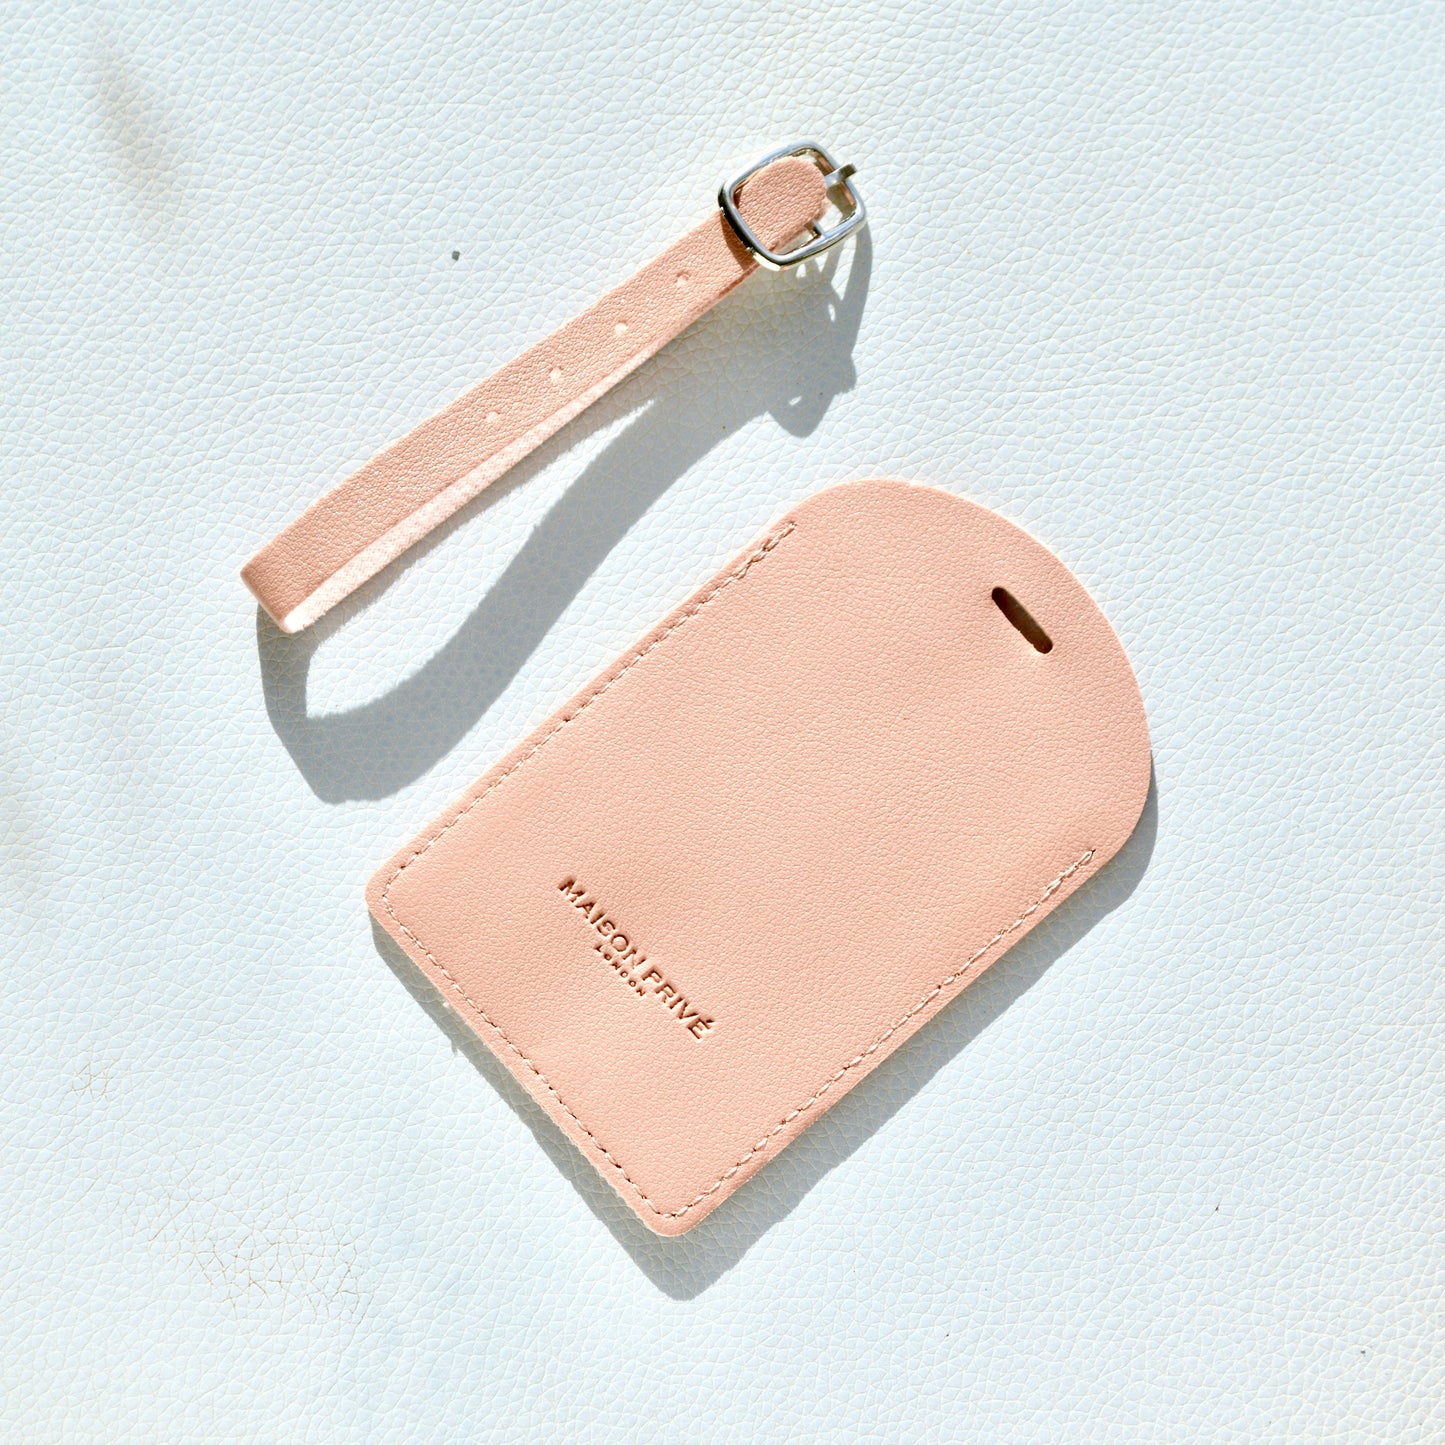 LUGGAGE TAG IN PINK SAFFIANO LEATHER